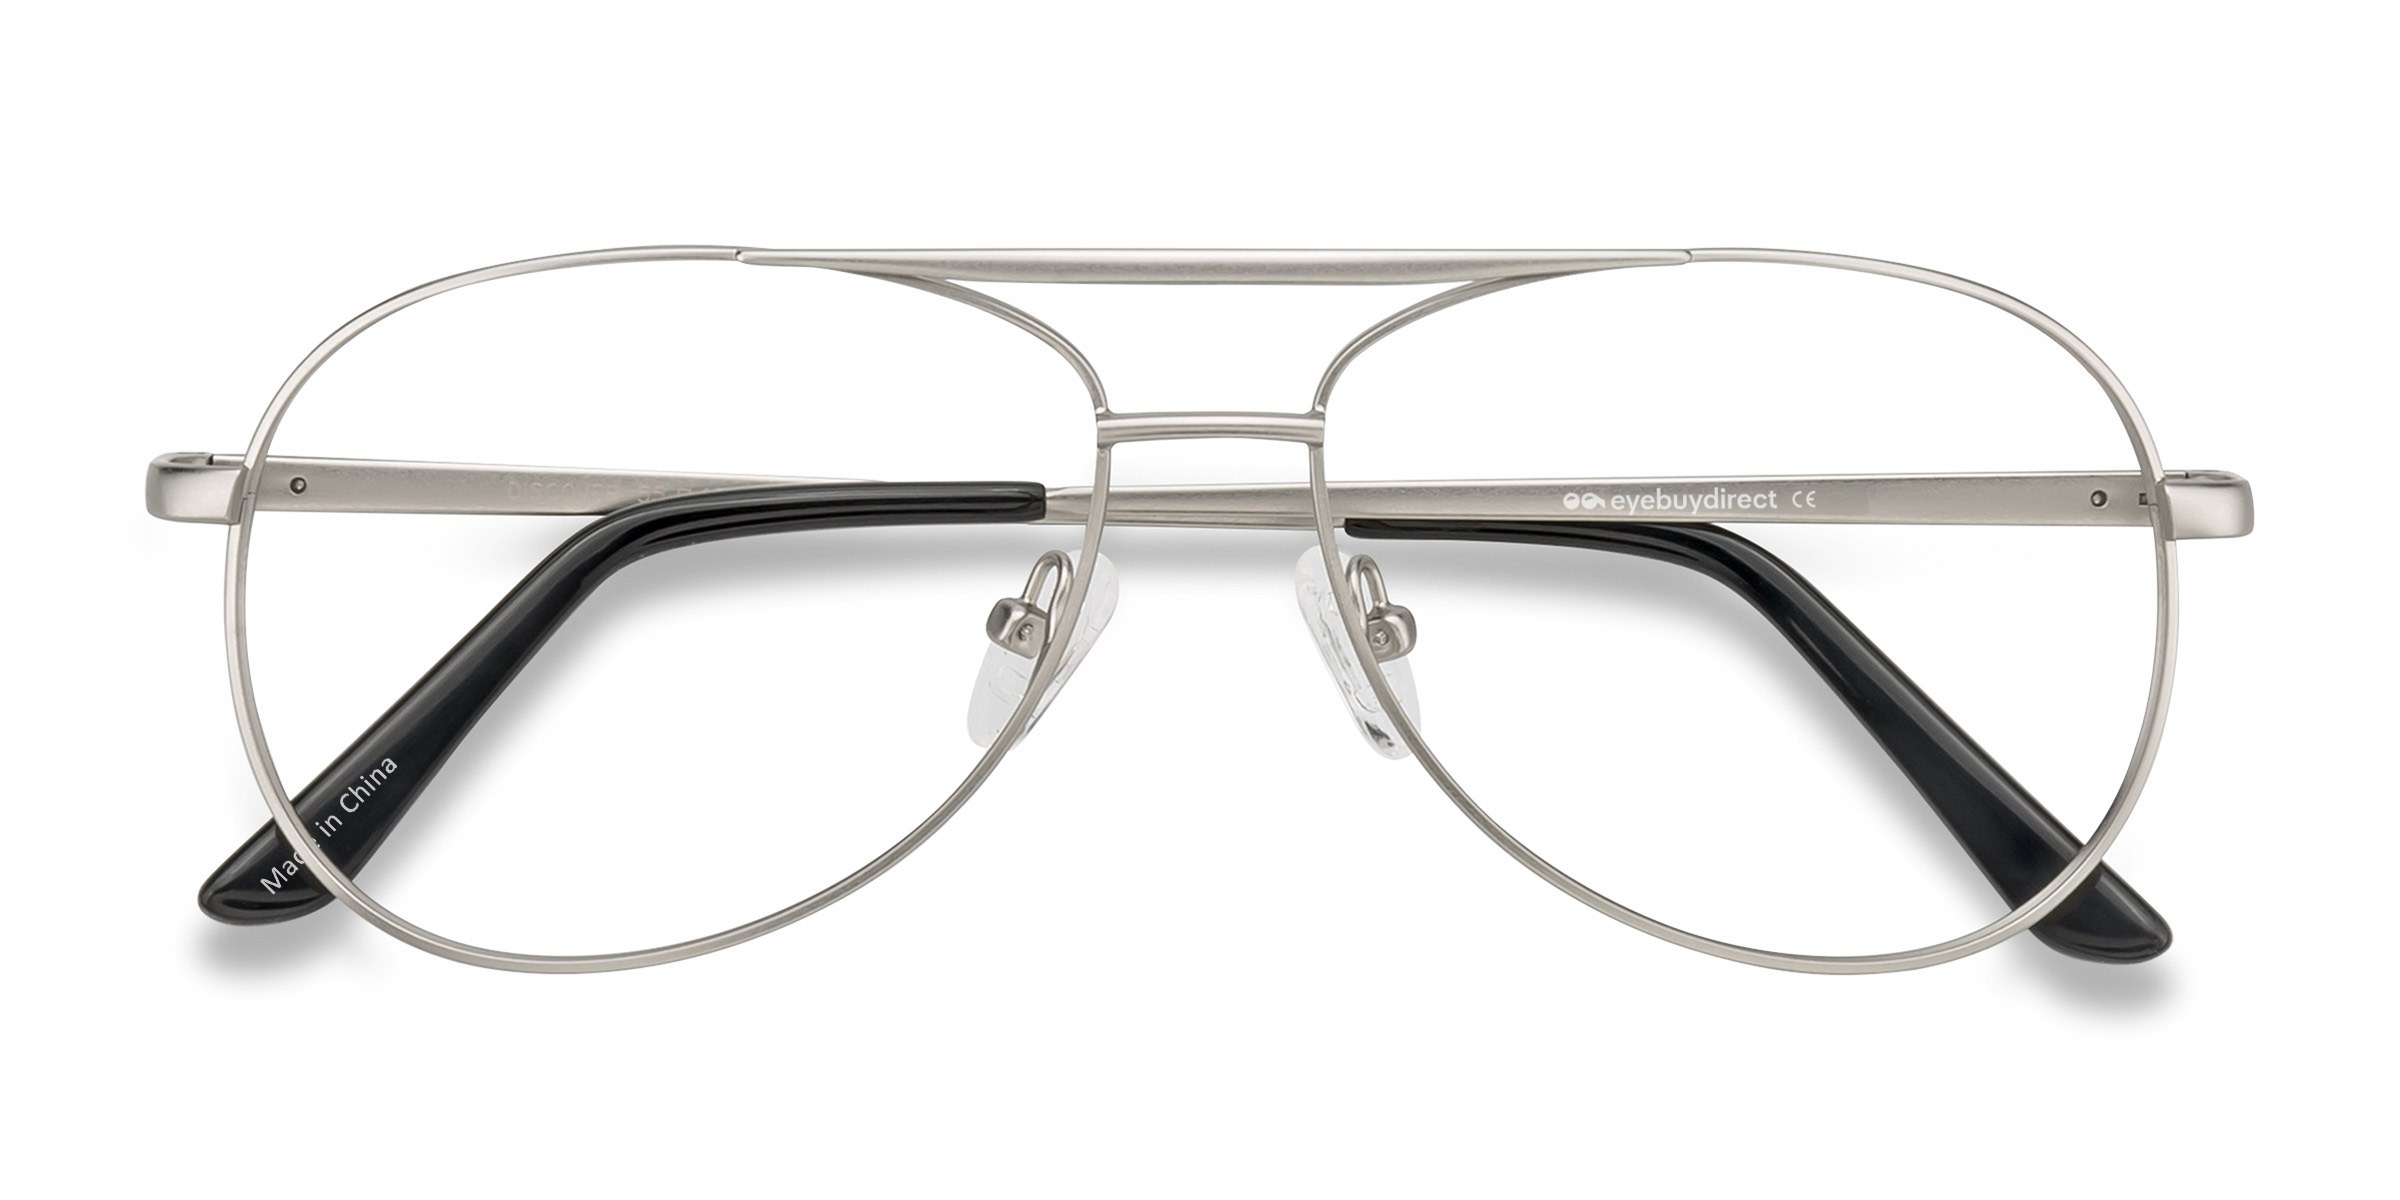 Glasses For Oval Faces The Best Frame Shapes Eyebuydirect 